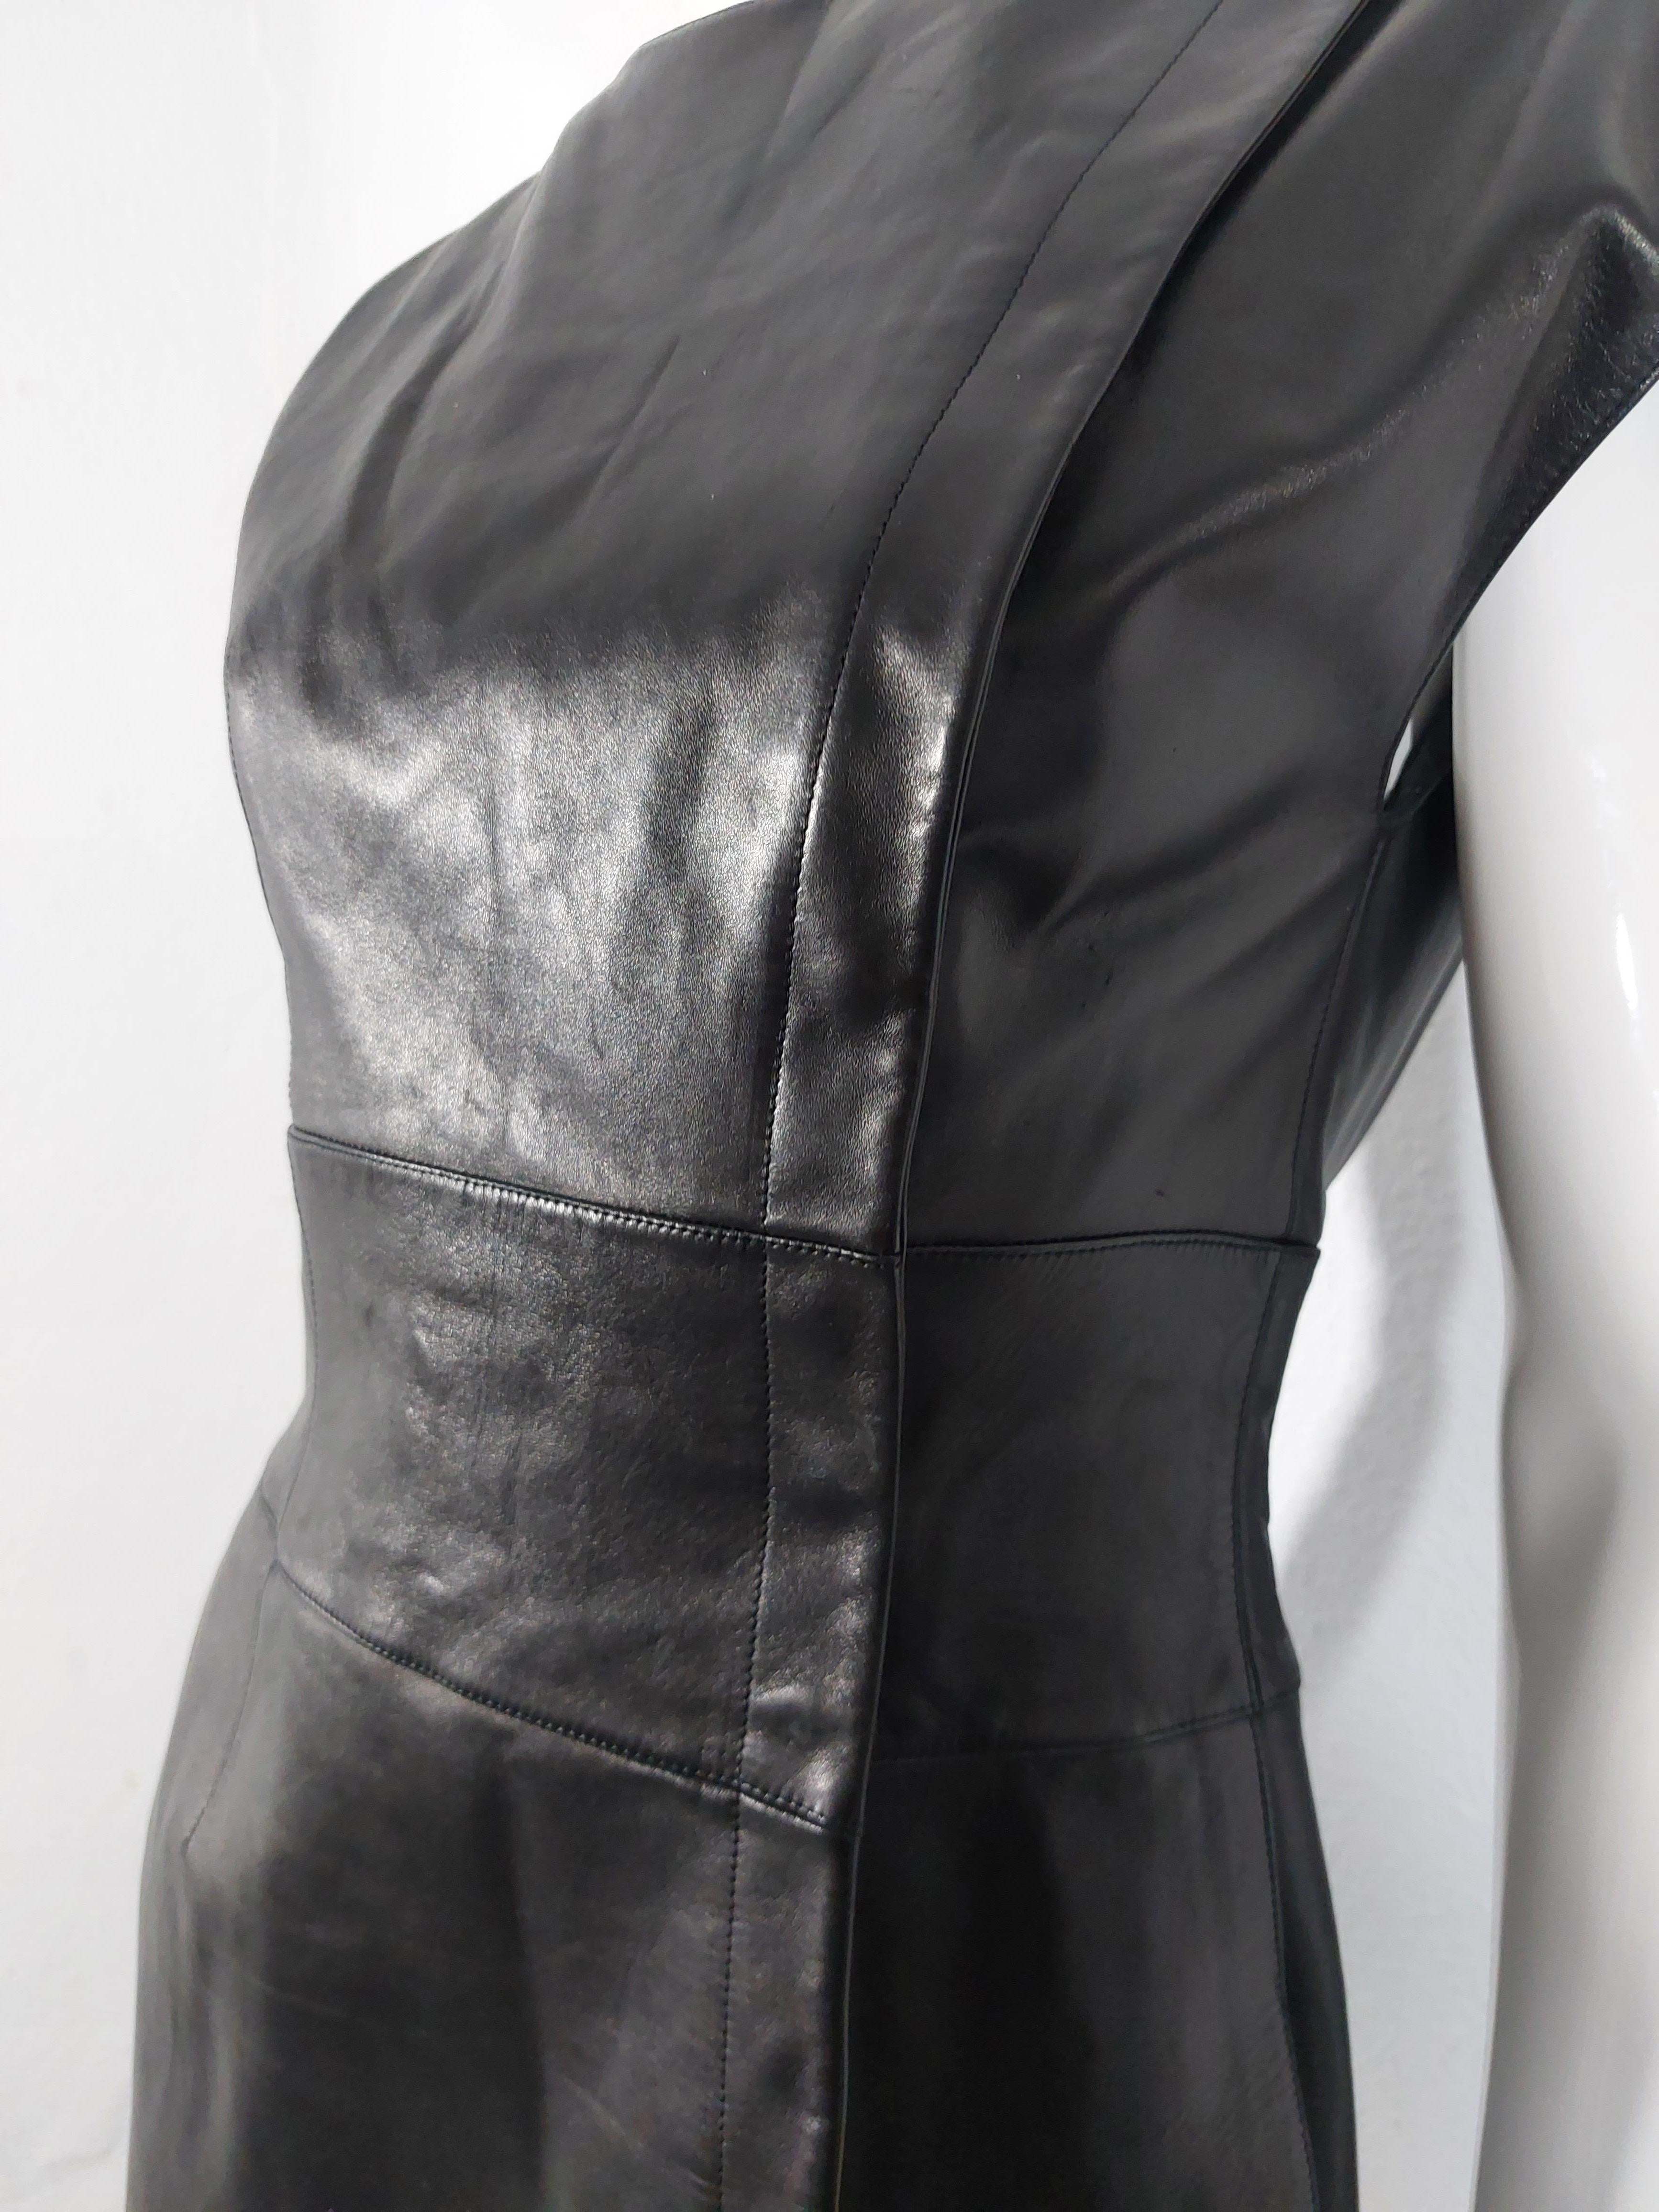 Thierry Mugler Couture Lambskin Leather Snap Evening Wrap Split Sculptural Dress For Sale 2